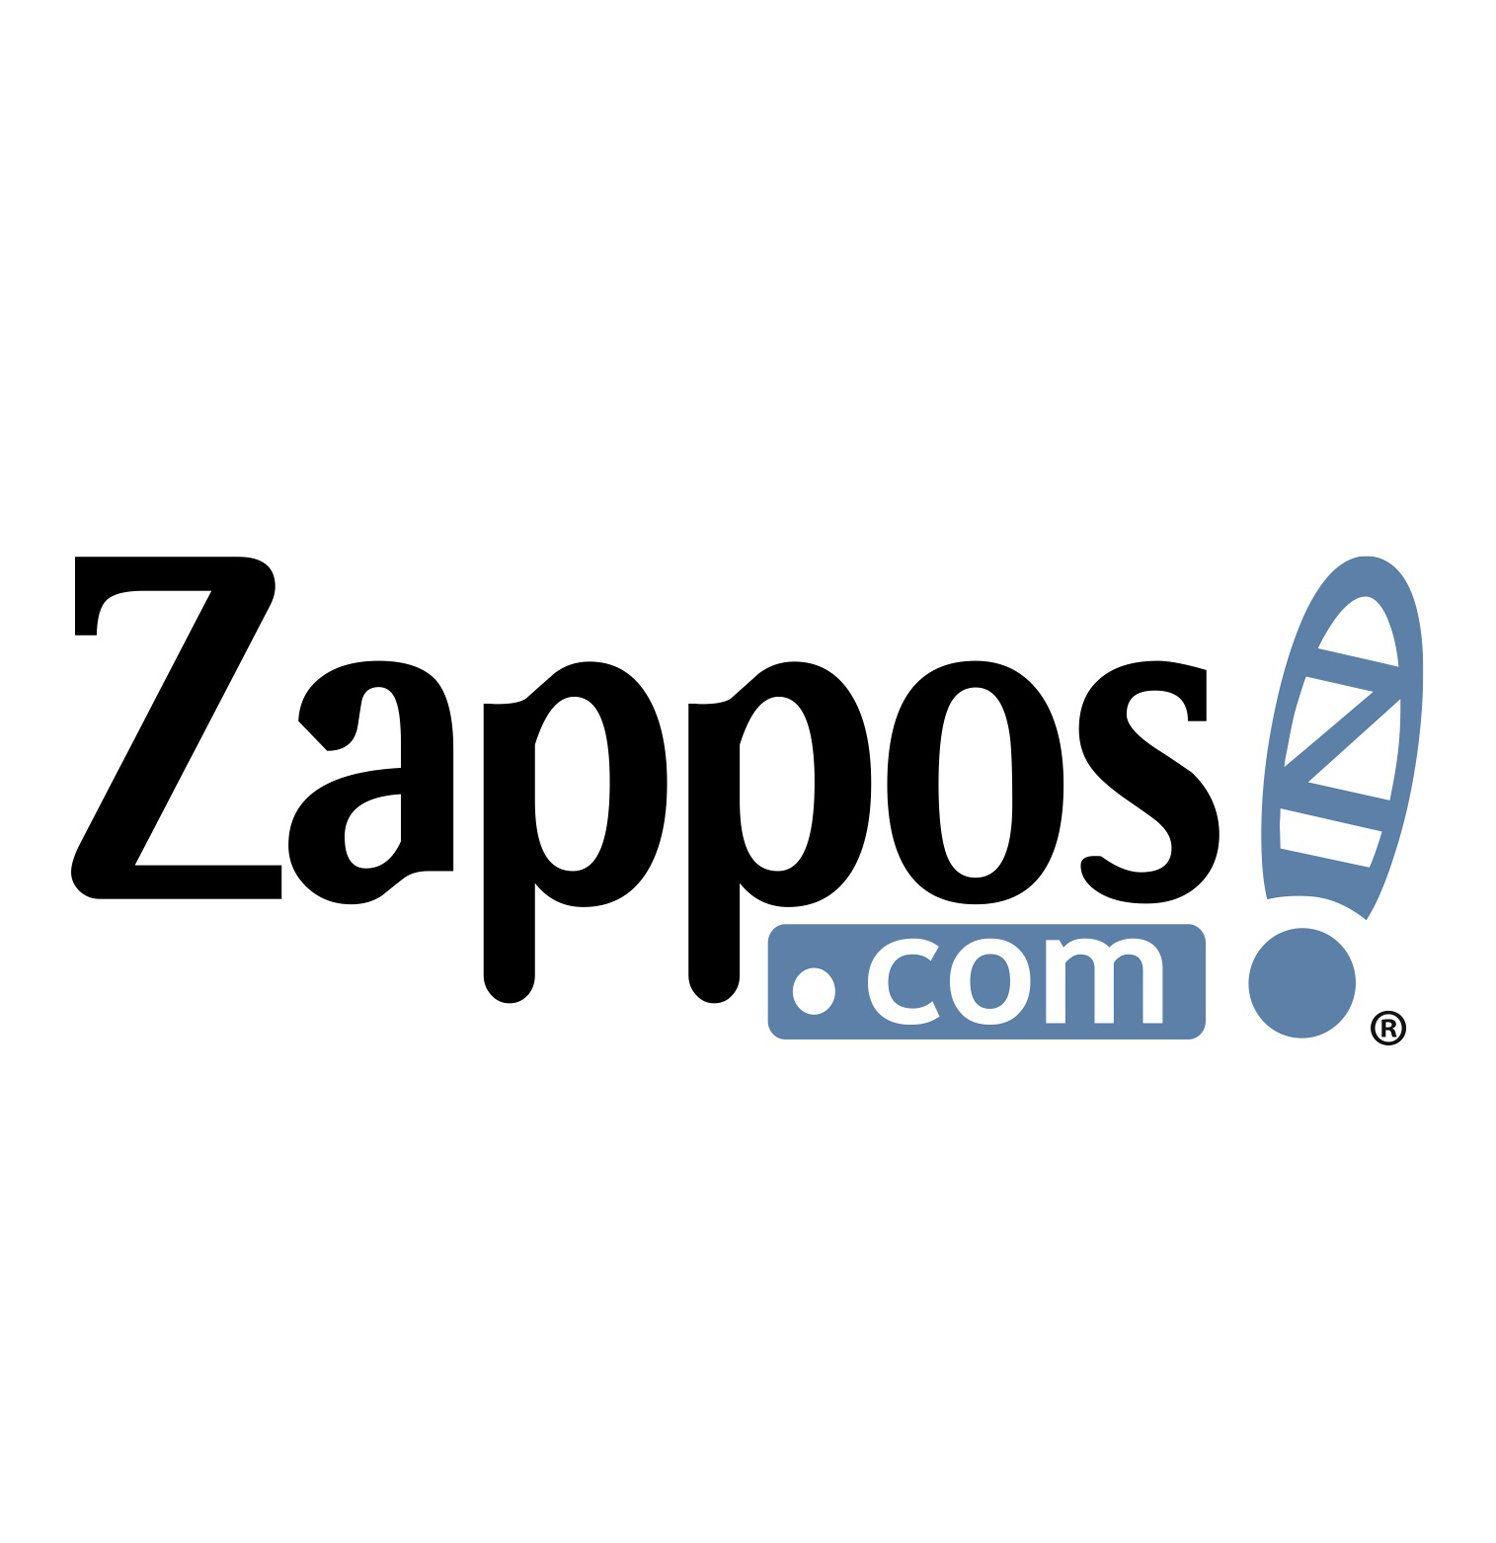 Zappos Logo - What You Need to Know About Zappos' New Loyalty Program | Real Simple